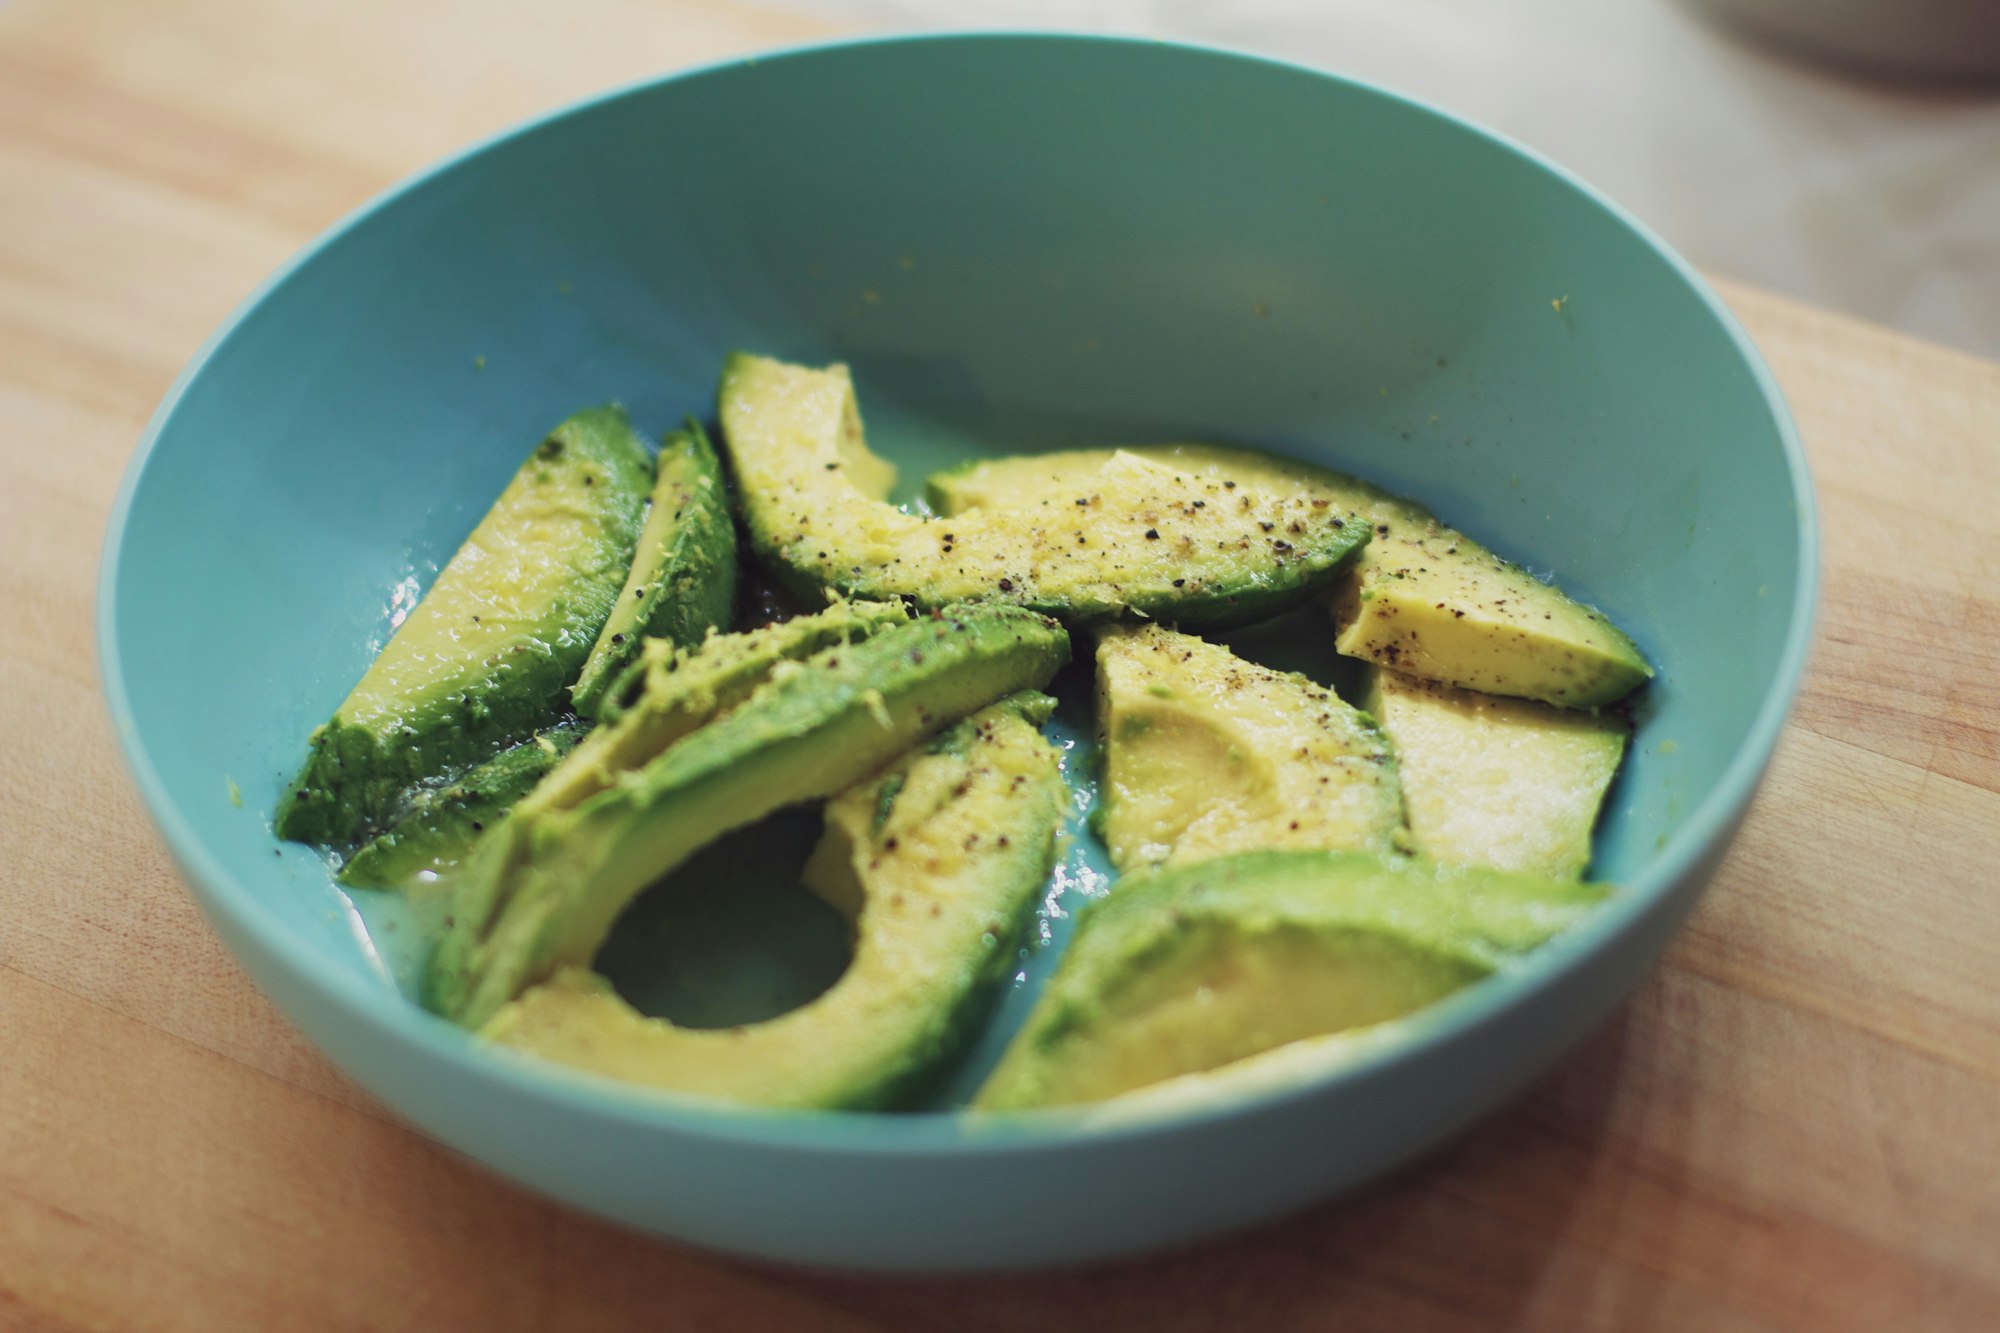 Sliced avocados in a teal bowl on a cutting board.